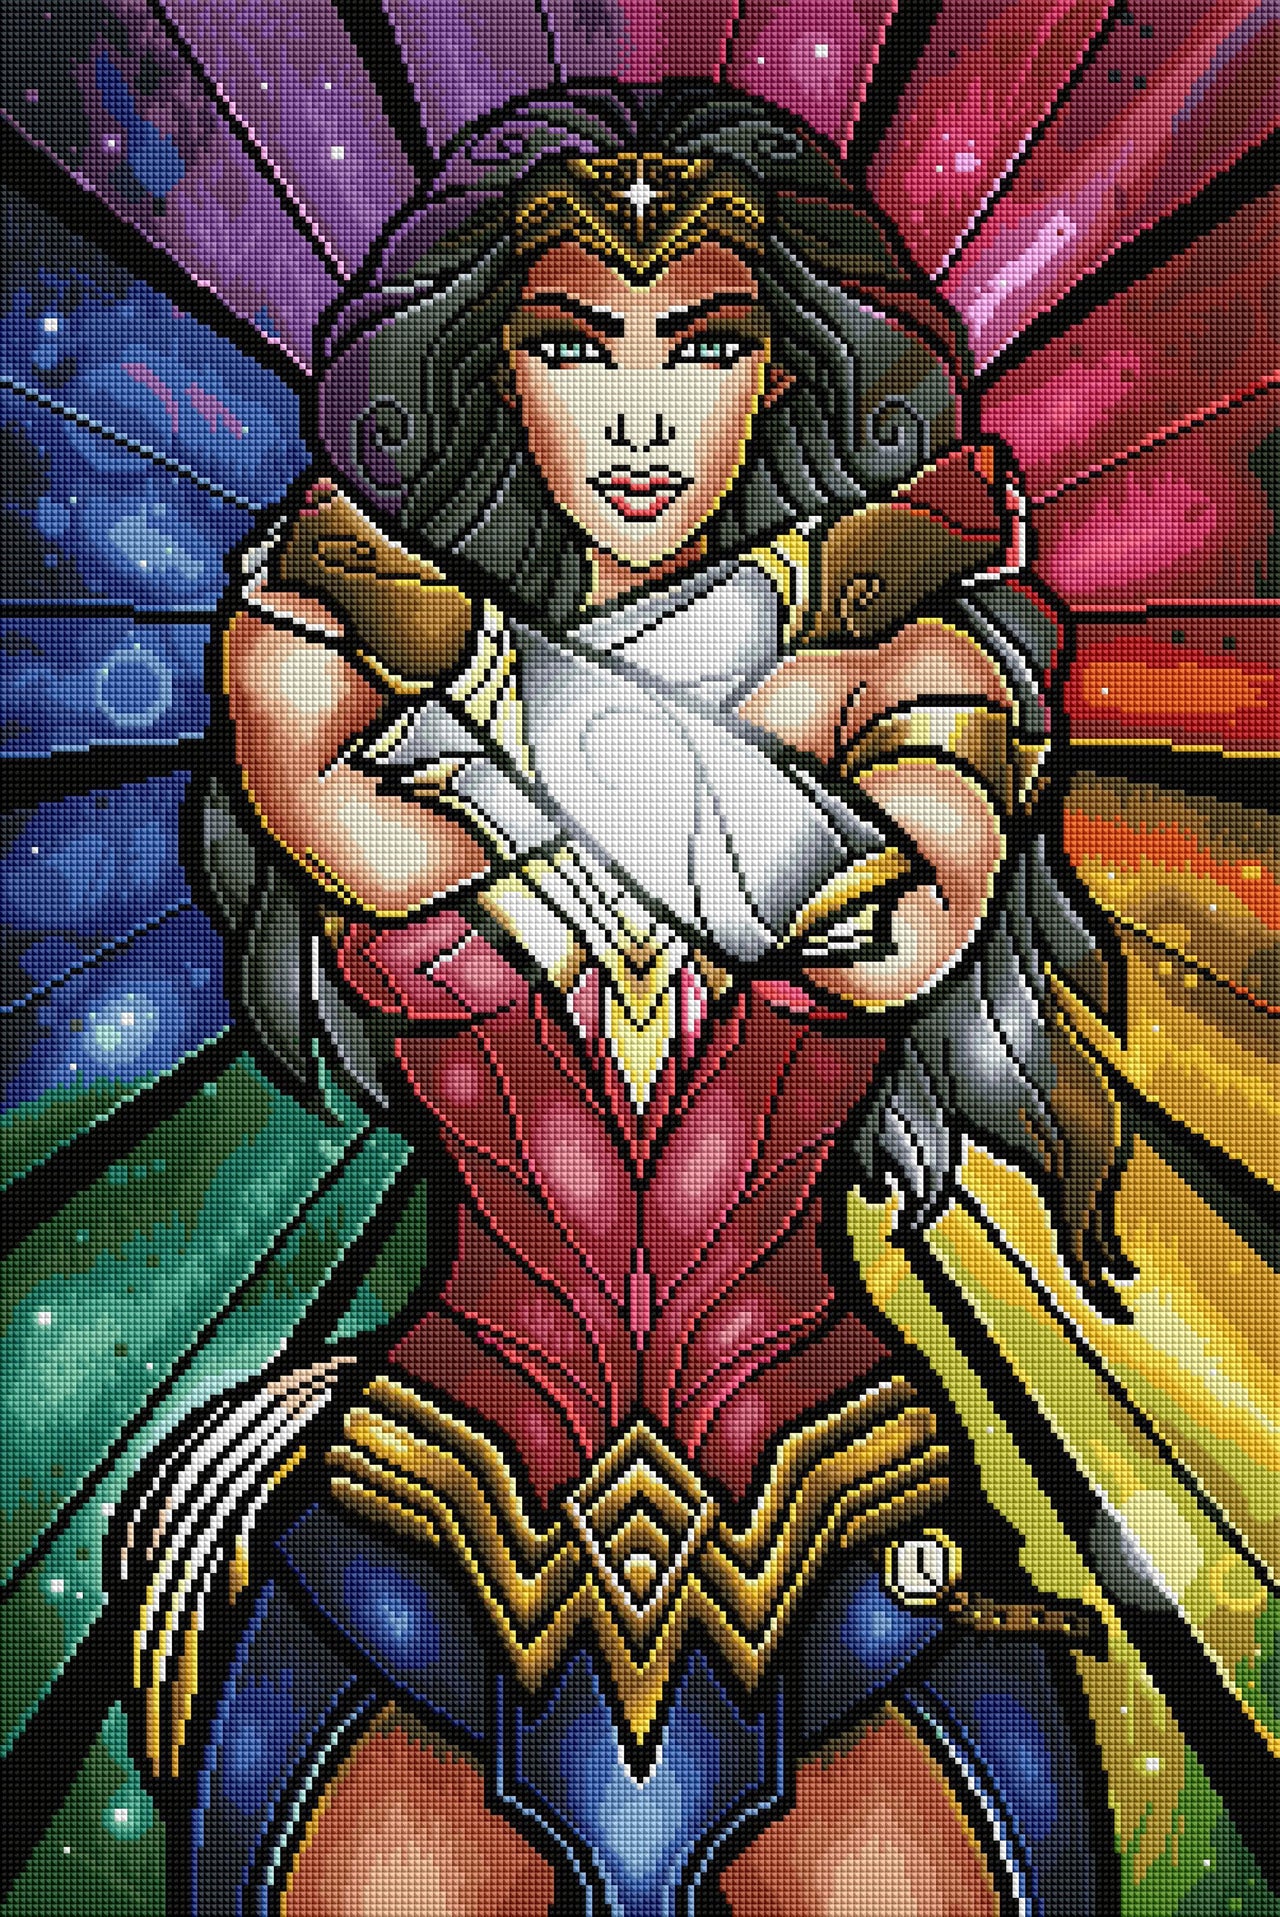 Diamond Painting Wonder Woman 1984™ 20" x 30" (51cm x 76cm) / Square With 67 Colors Including 4 ABs / 60,501